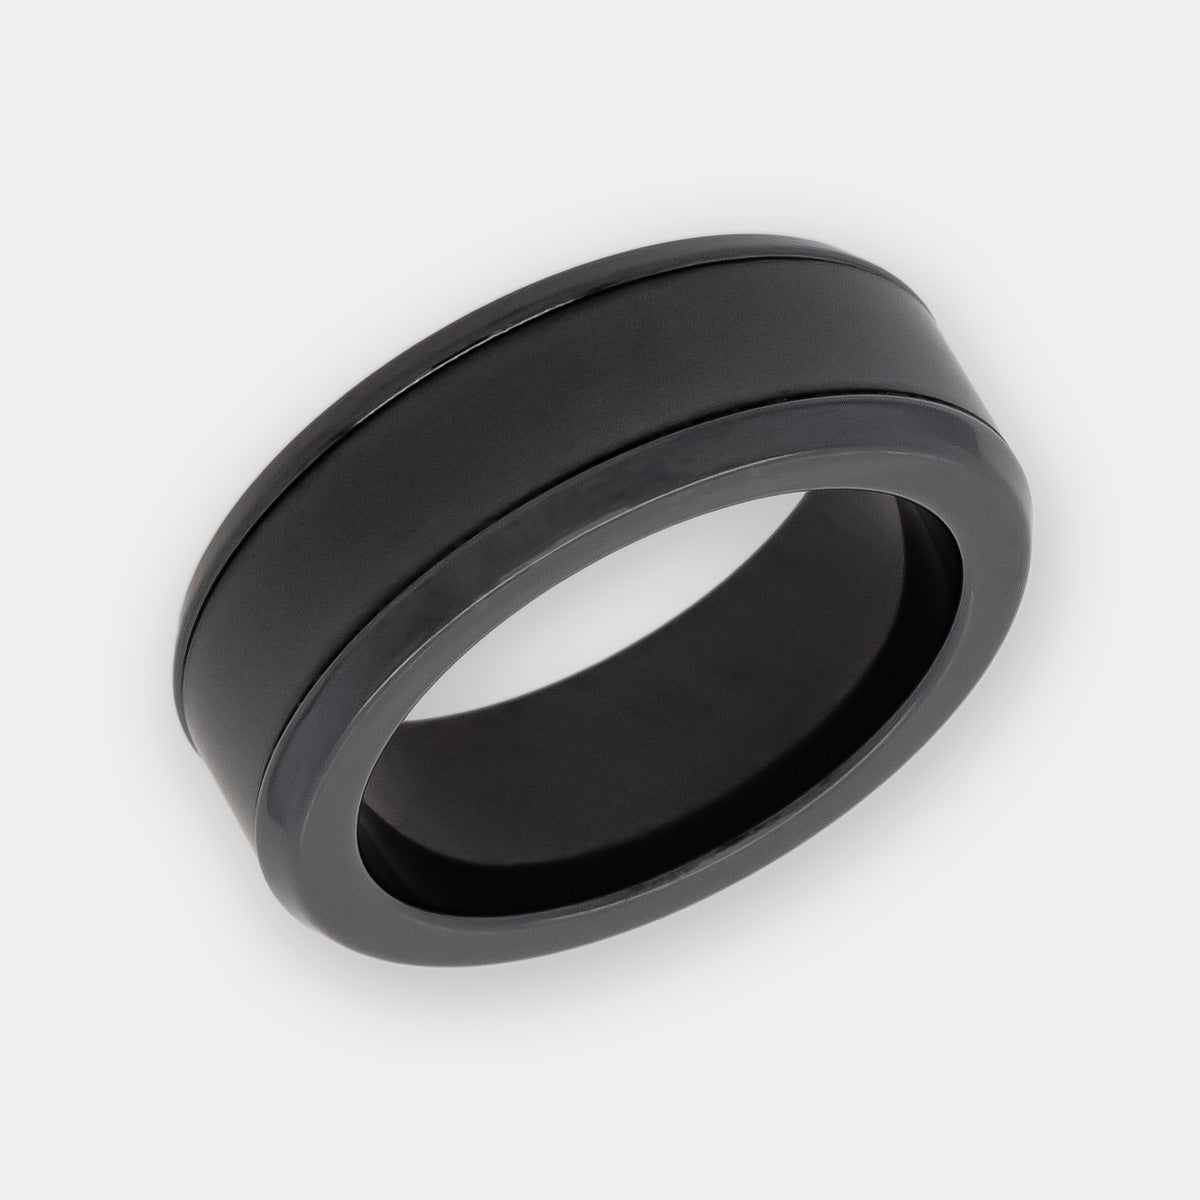 Zirconium & Solid Black Diamond Inlay Ring | Elysium Black Diamond Ring - Achilles 8mm | Men's Black Diamond Wedding Rings & Bands | Products | Image 1